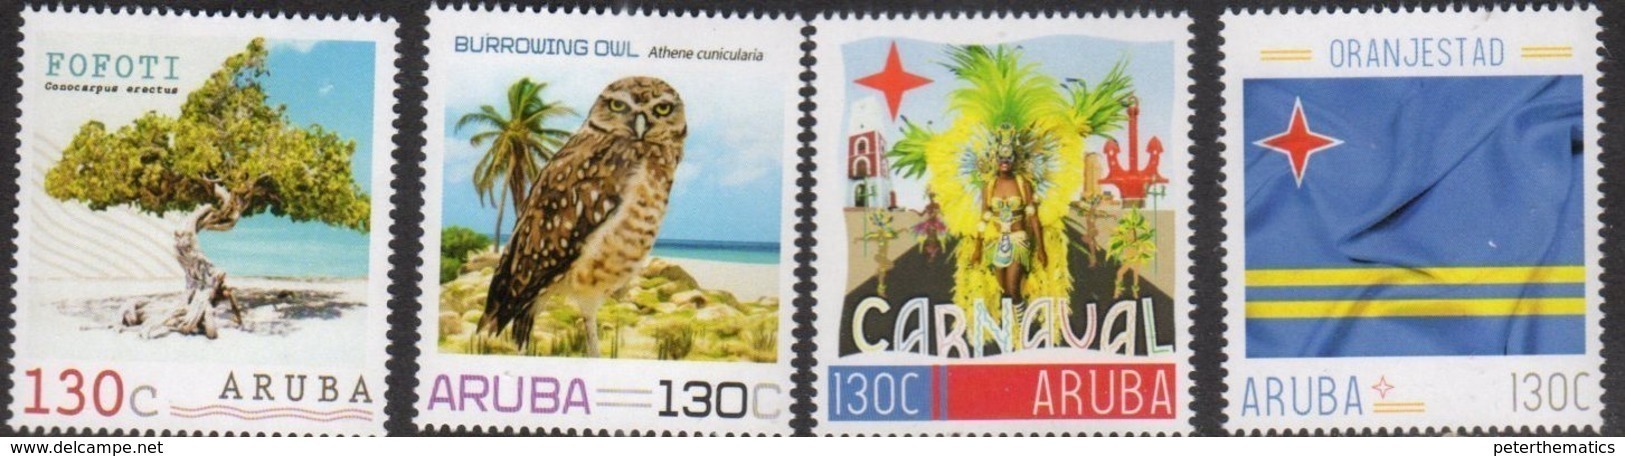 ARUBA, 2018, MNH, PERSONALIZED STAMPS, BIRDS, OWLS, CARNIVALS, FLAGS, TREES , 4v - Hiboux & Chouettes